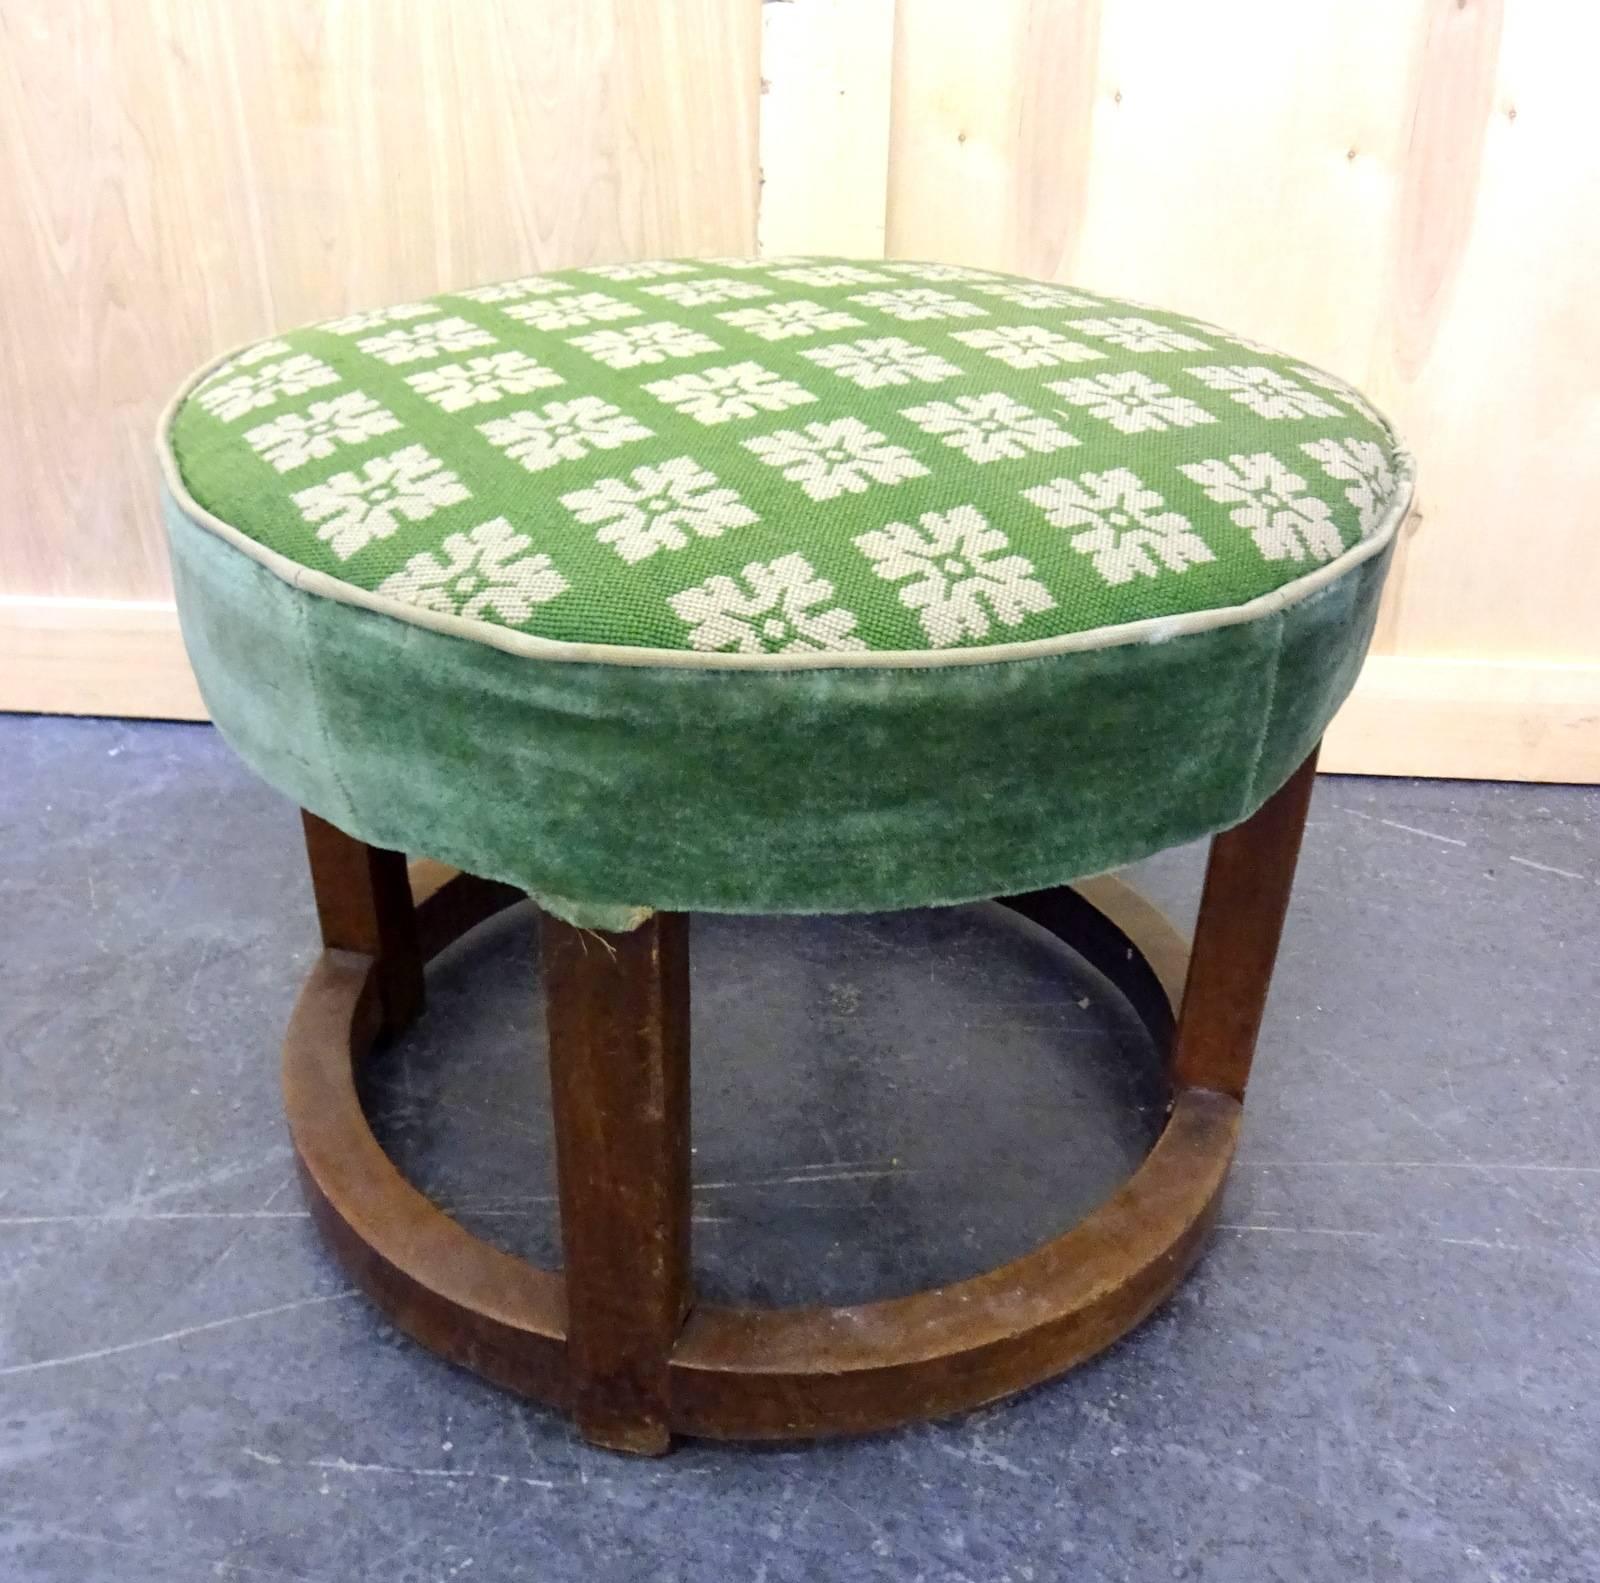 Ottoman in its original condition from the 1930s
Located in Brooklyn.